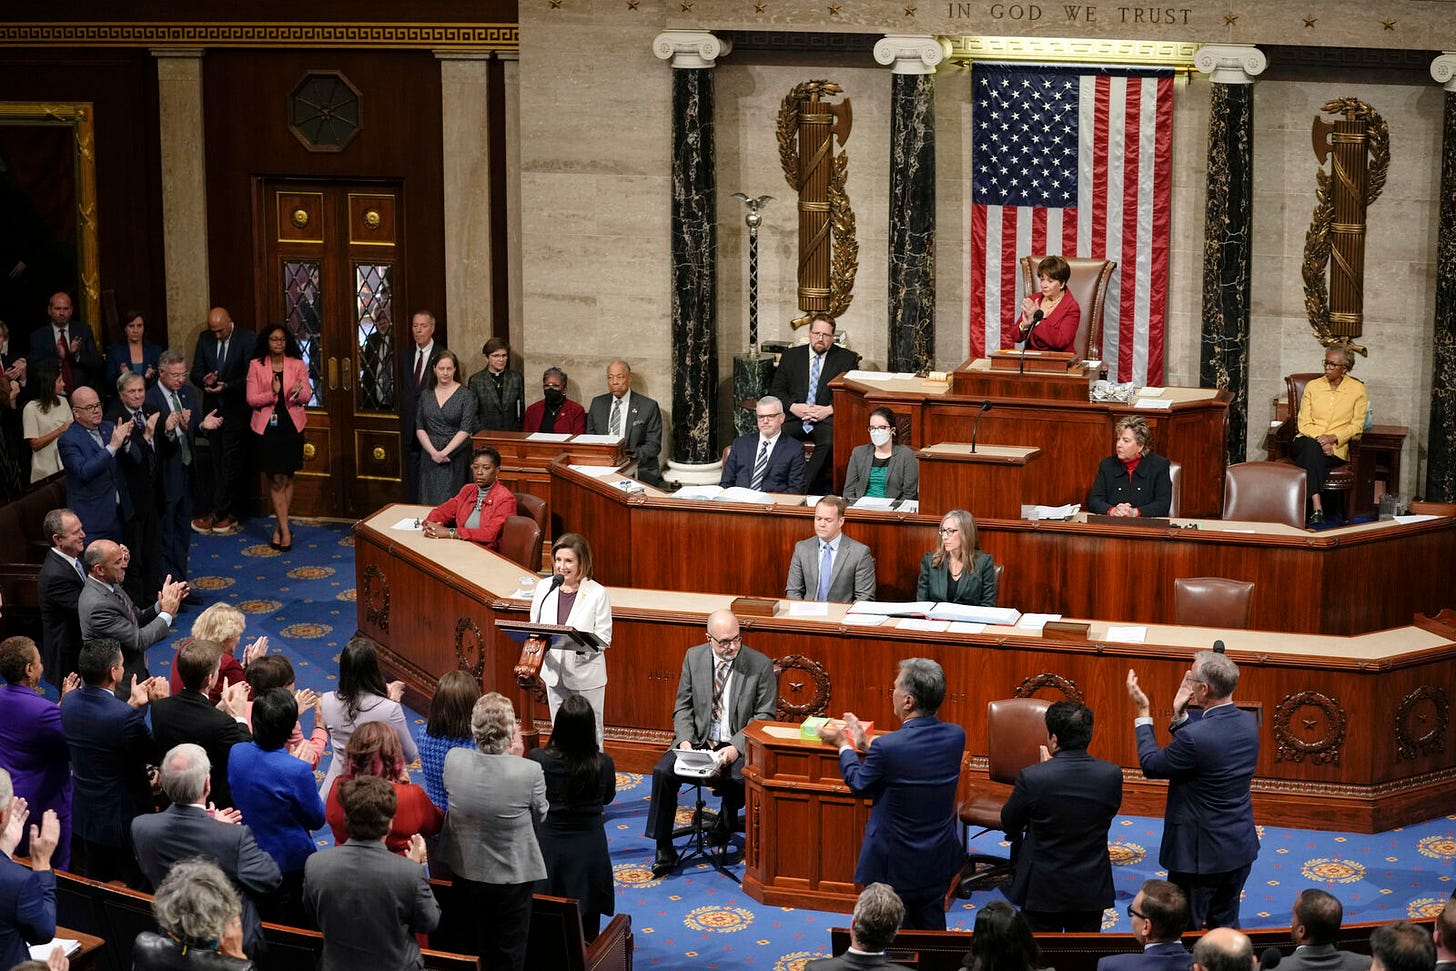 Nancy Pelosi, in a white pant suit, speaks on the House floor. She is receiving a standing ovation from her colleagues.